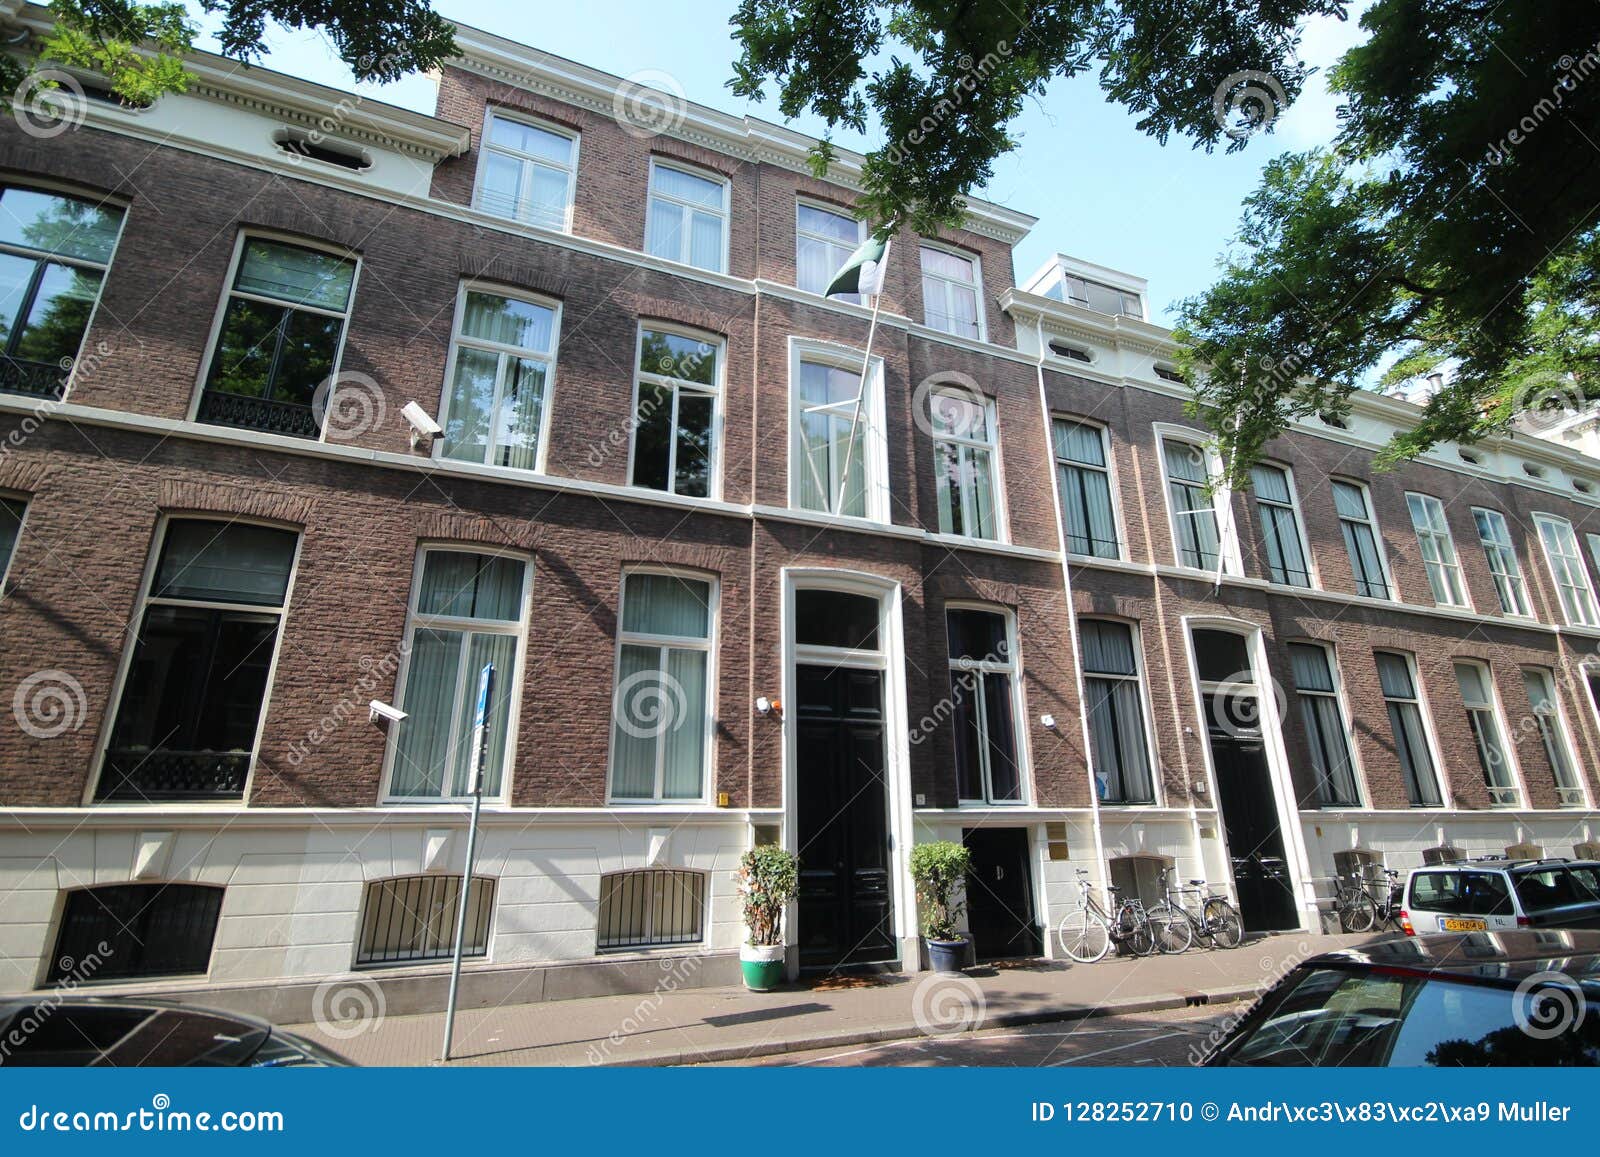 of Pakistan in City of the Hague Where All Diplomats are Working in the Netherlands. Editorial Image - Image of residential, diplomat: 128252710